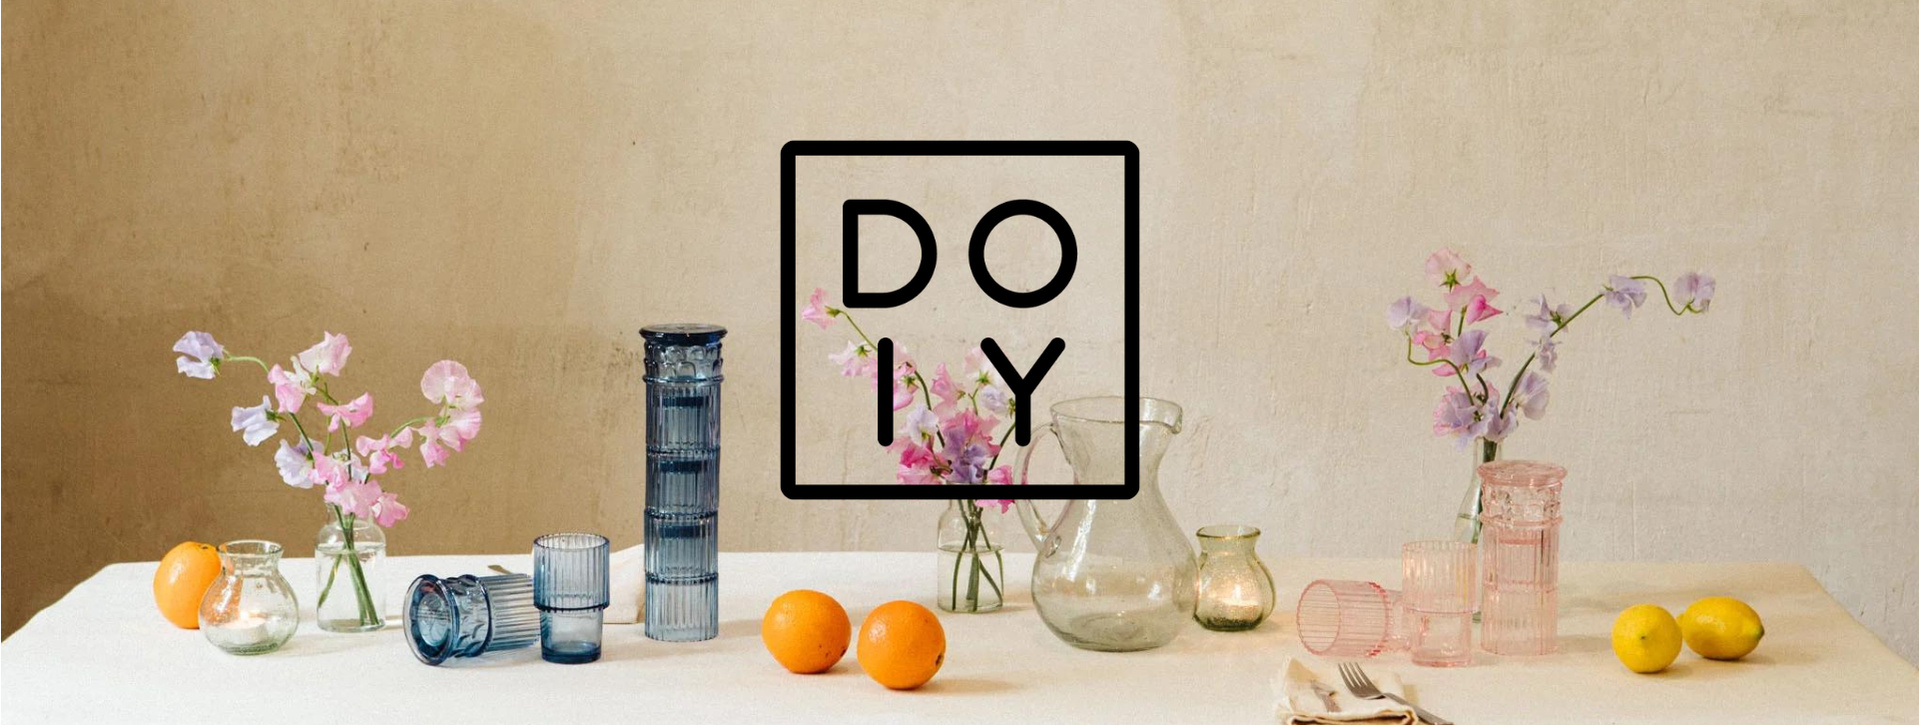 DOIY - Fresh Design for the decoration and equipment of your home